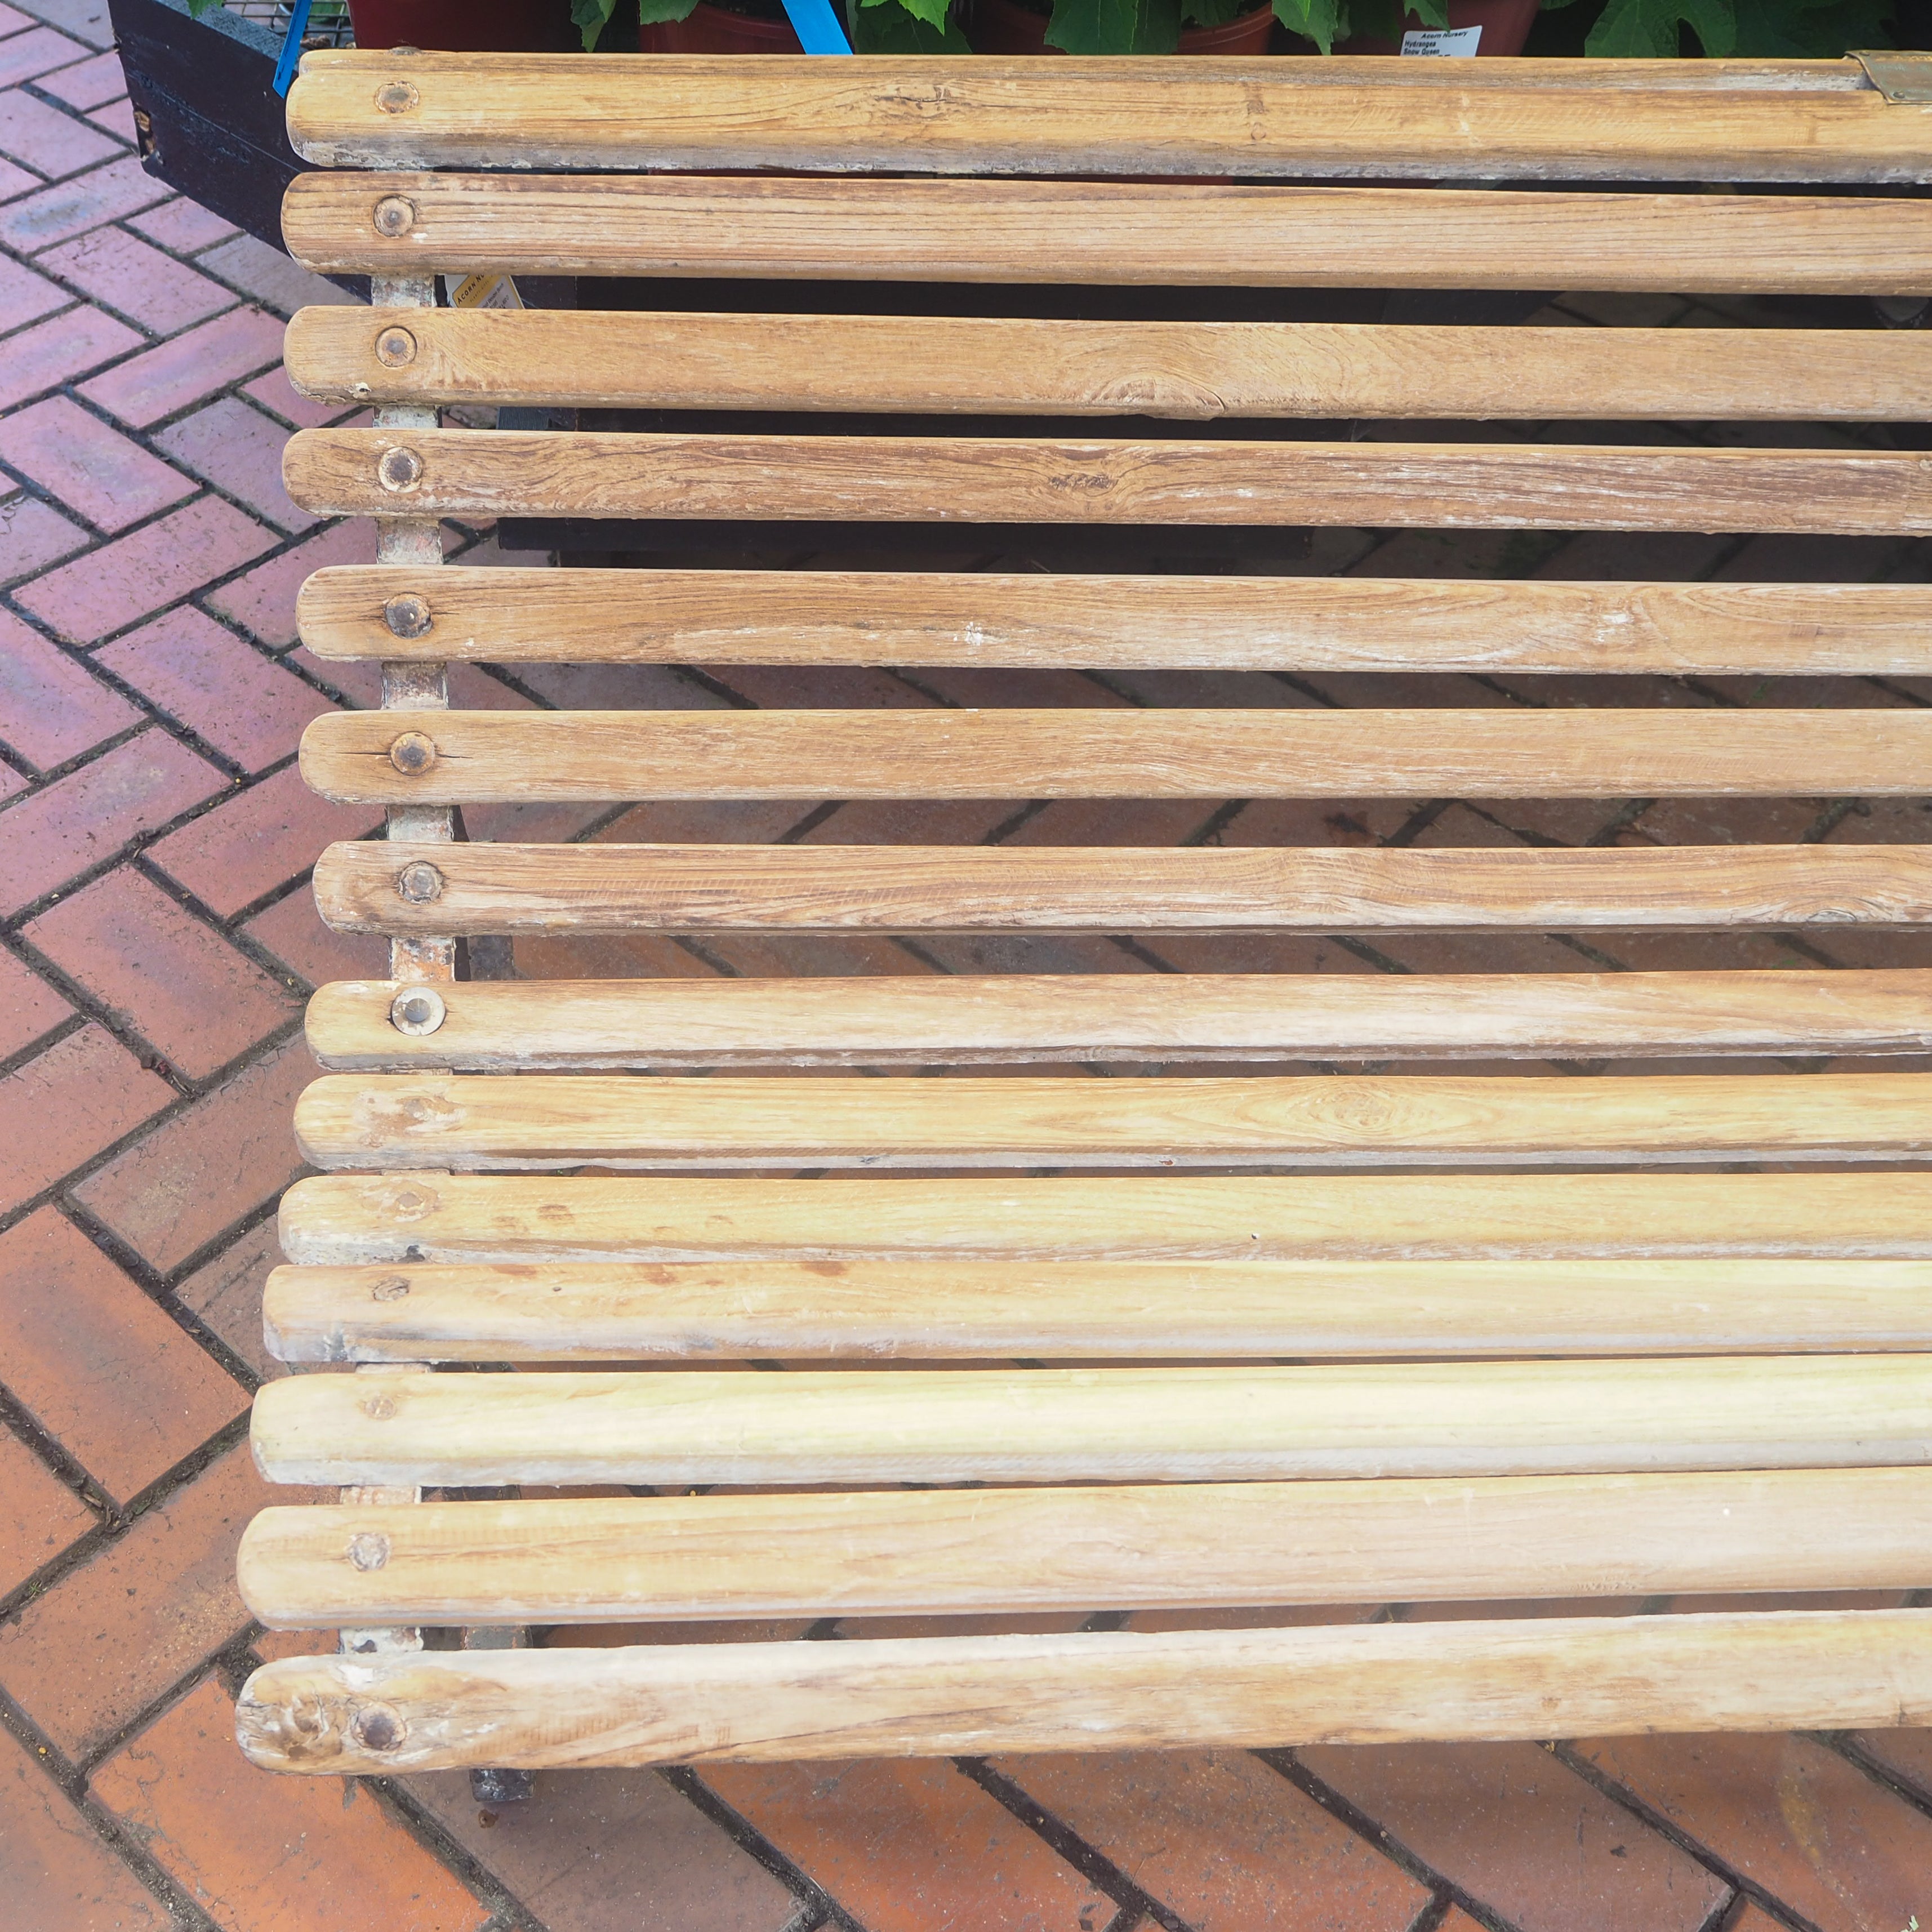 Bleached Timber Bench